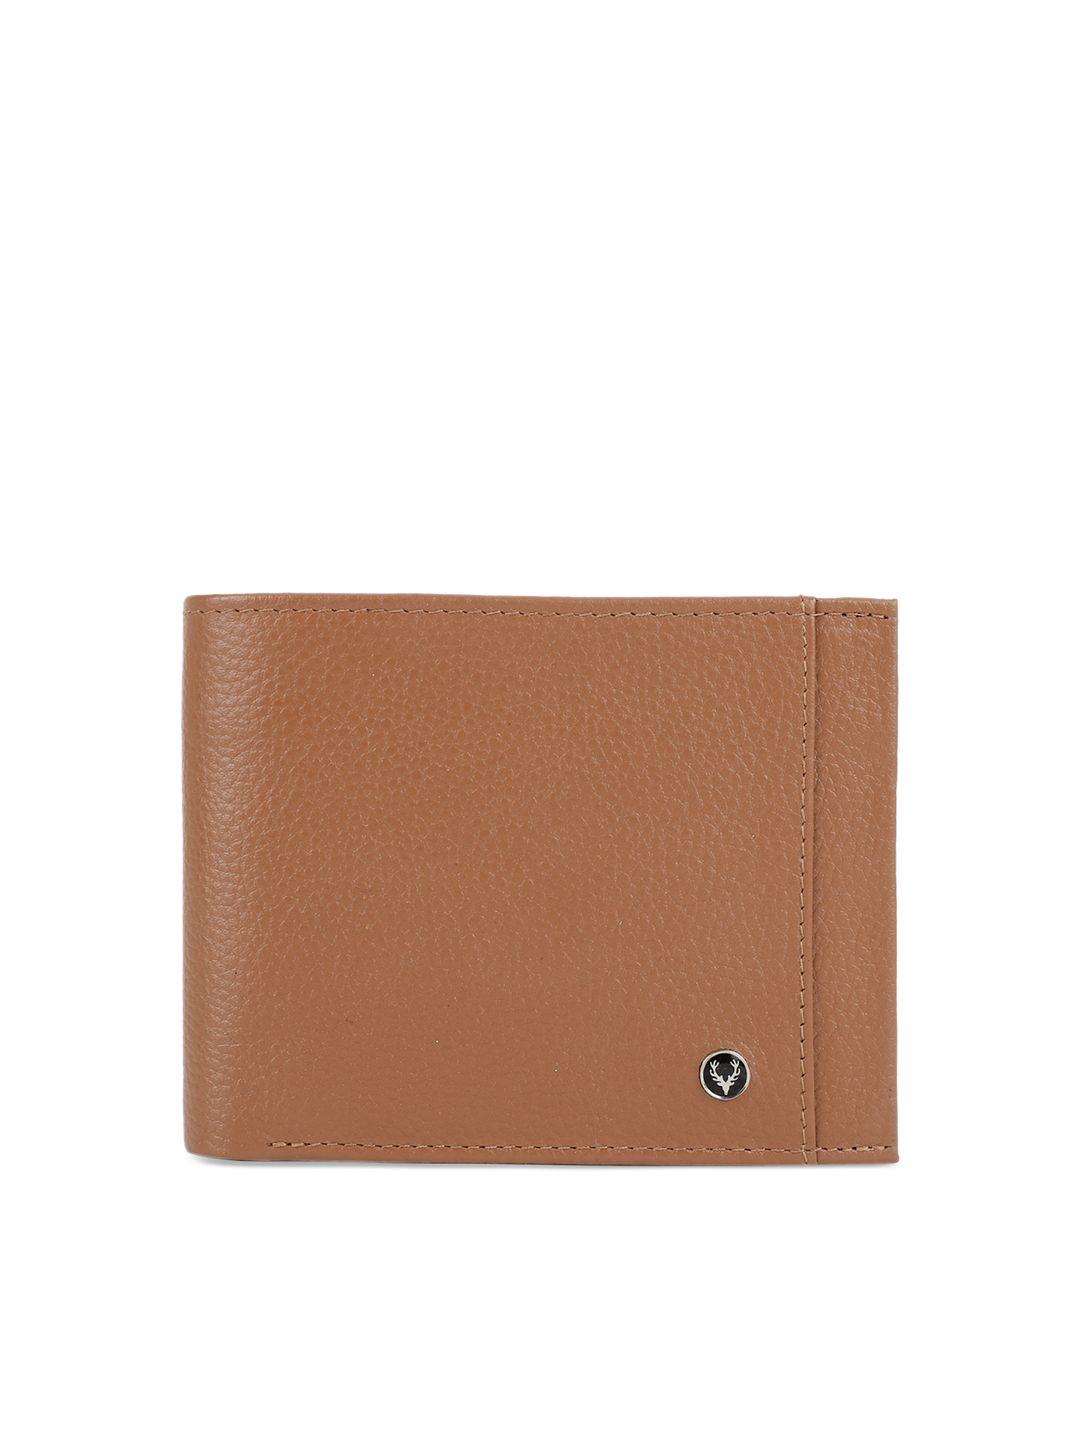 allen solly men brown solid leather two fold wallet